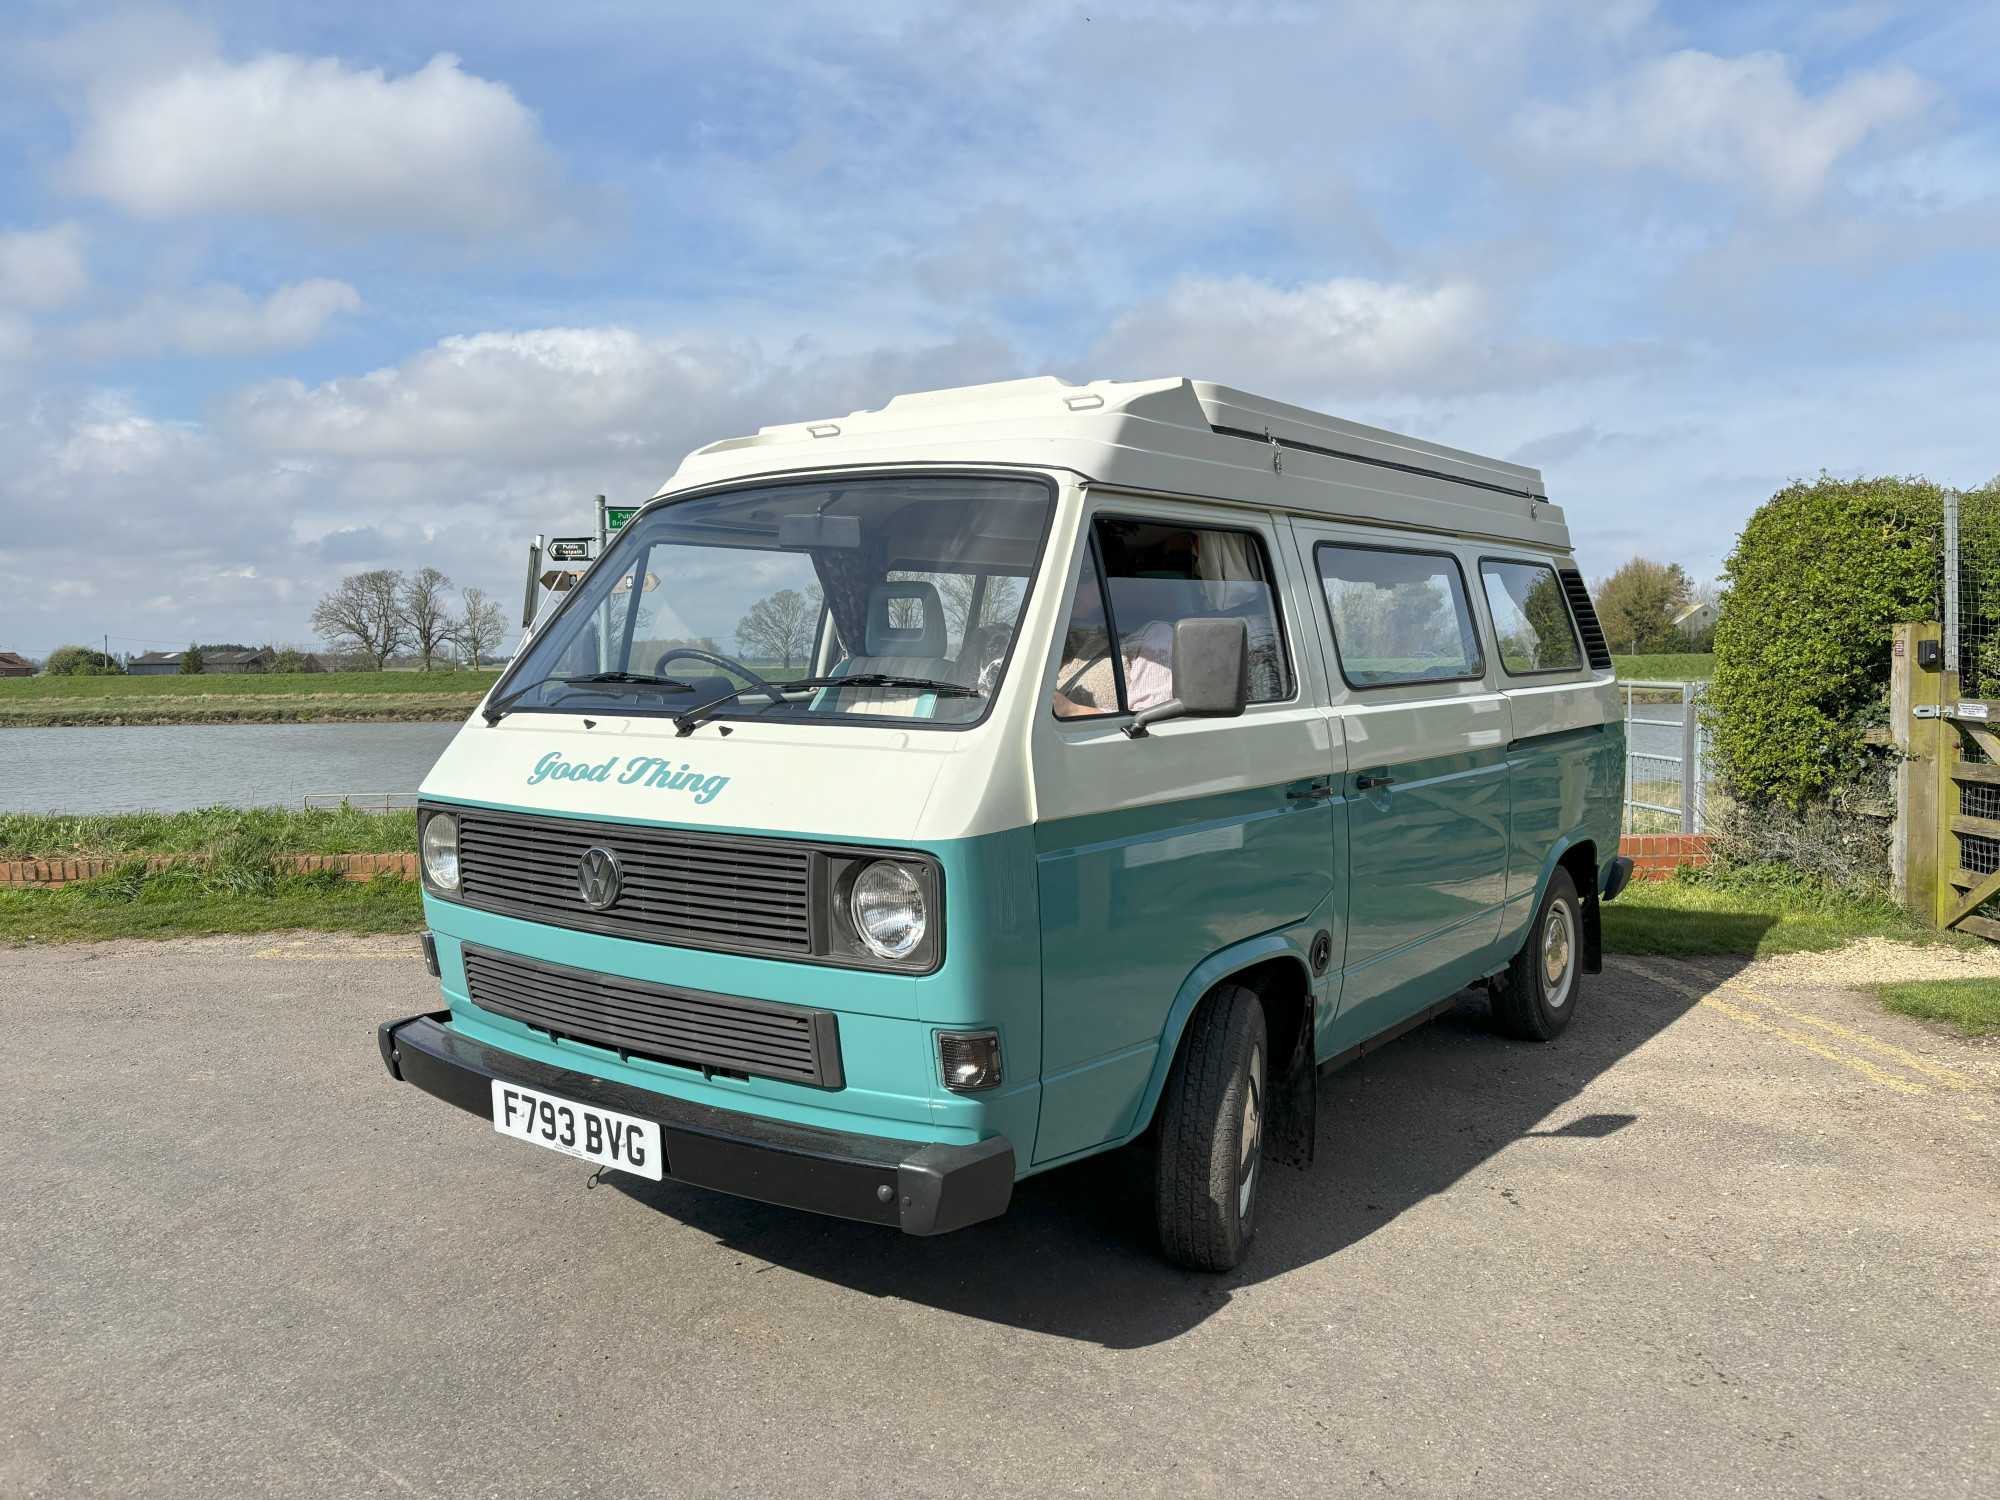 A VW T3 Campervan called GoodThing and for hire in King's Lynn, England